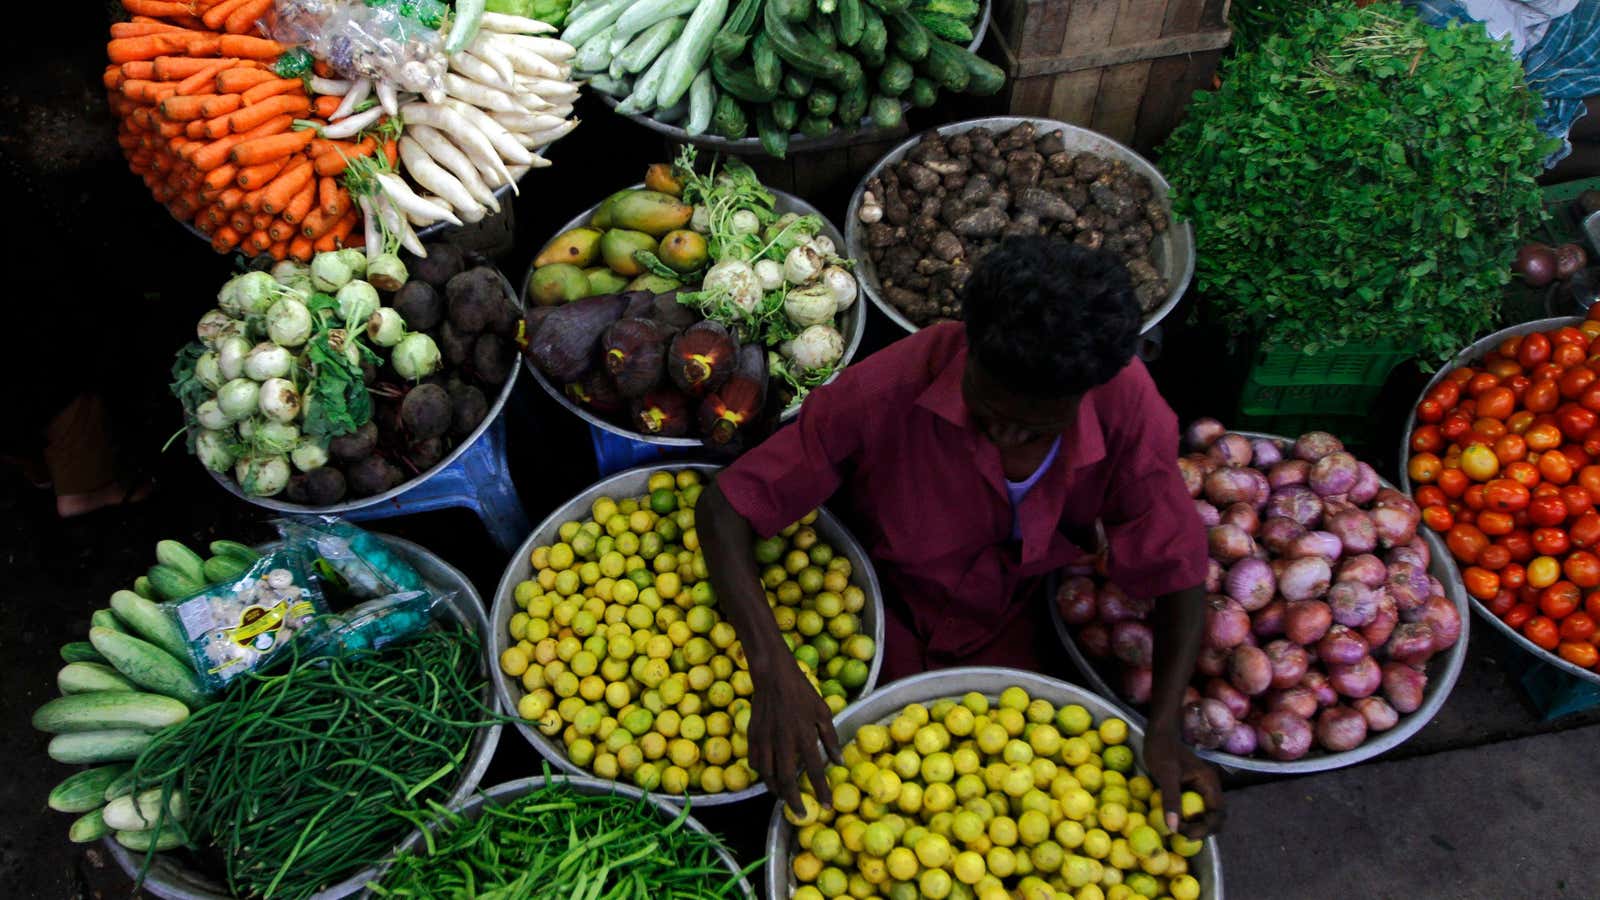 A fall in India's consumer prices in December is hiding essential risks